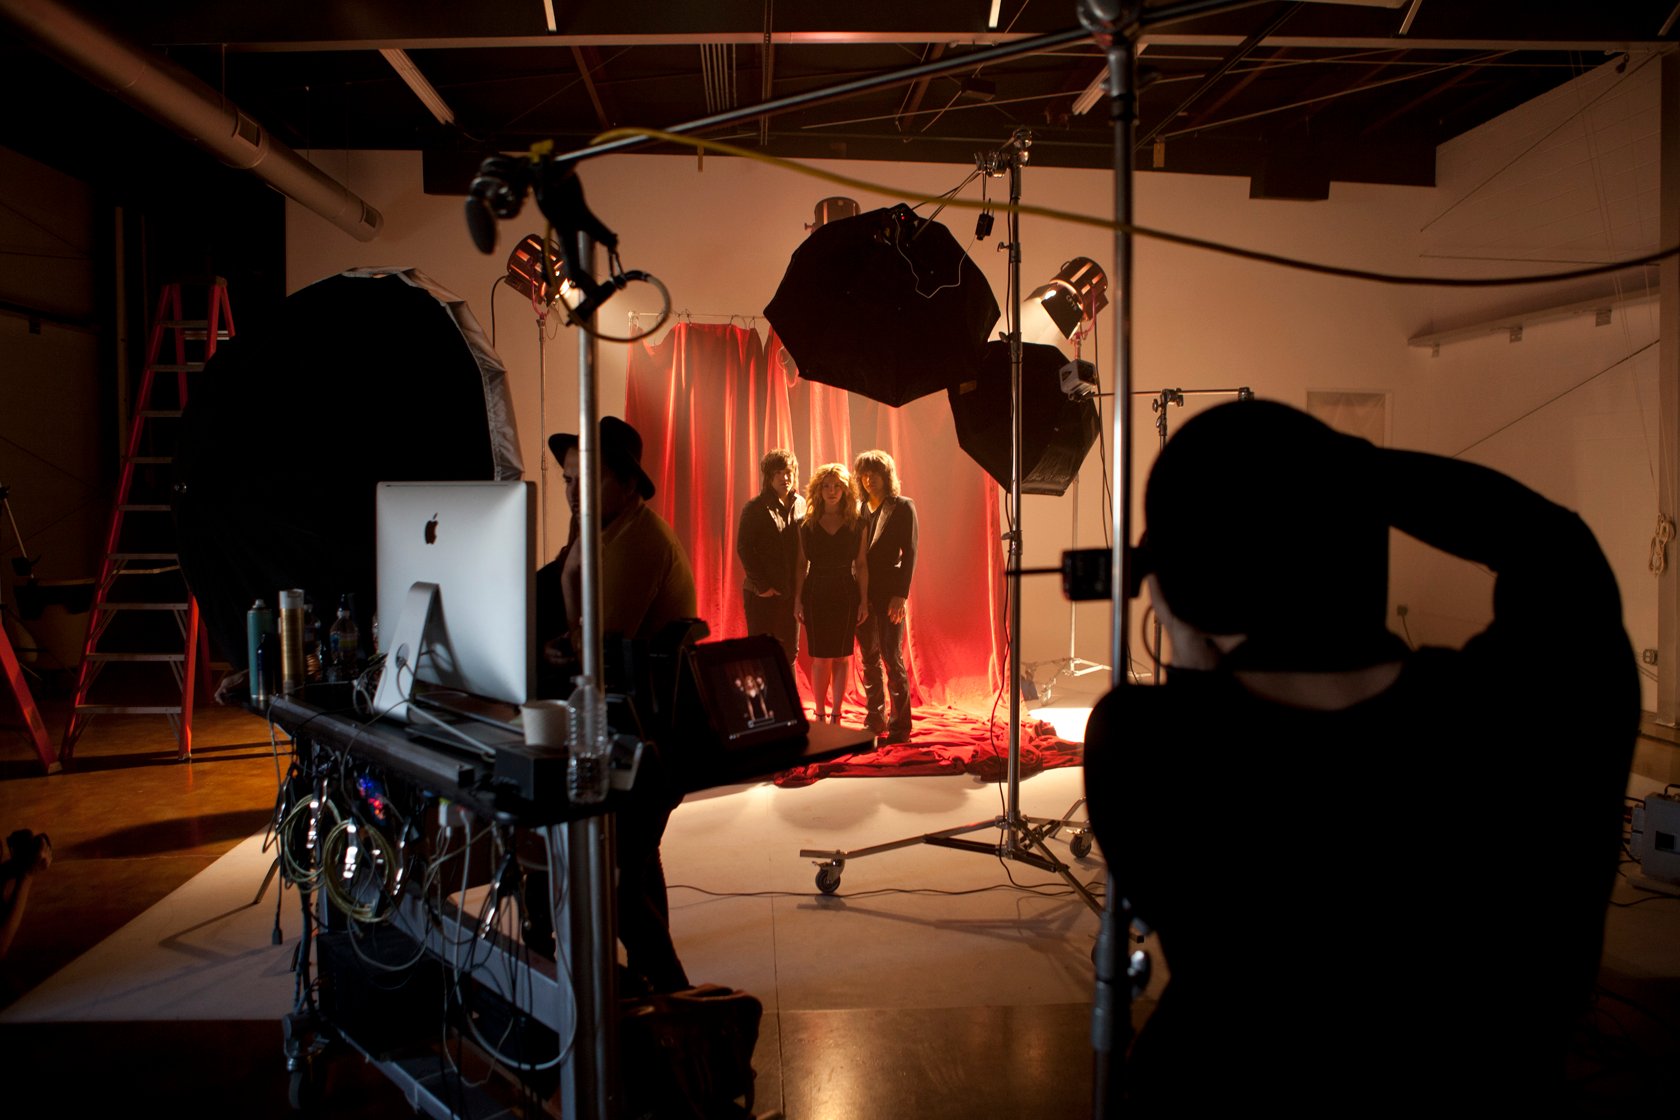 A behind the scenes image of The Band Perry against a red backdrop photographed by Robby Klein.